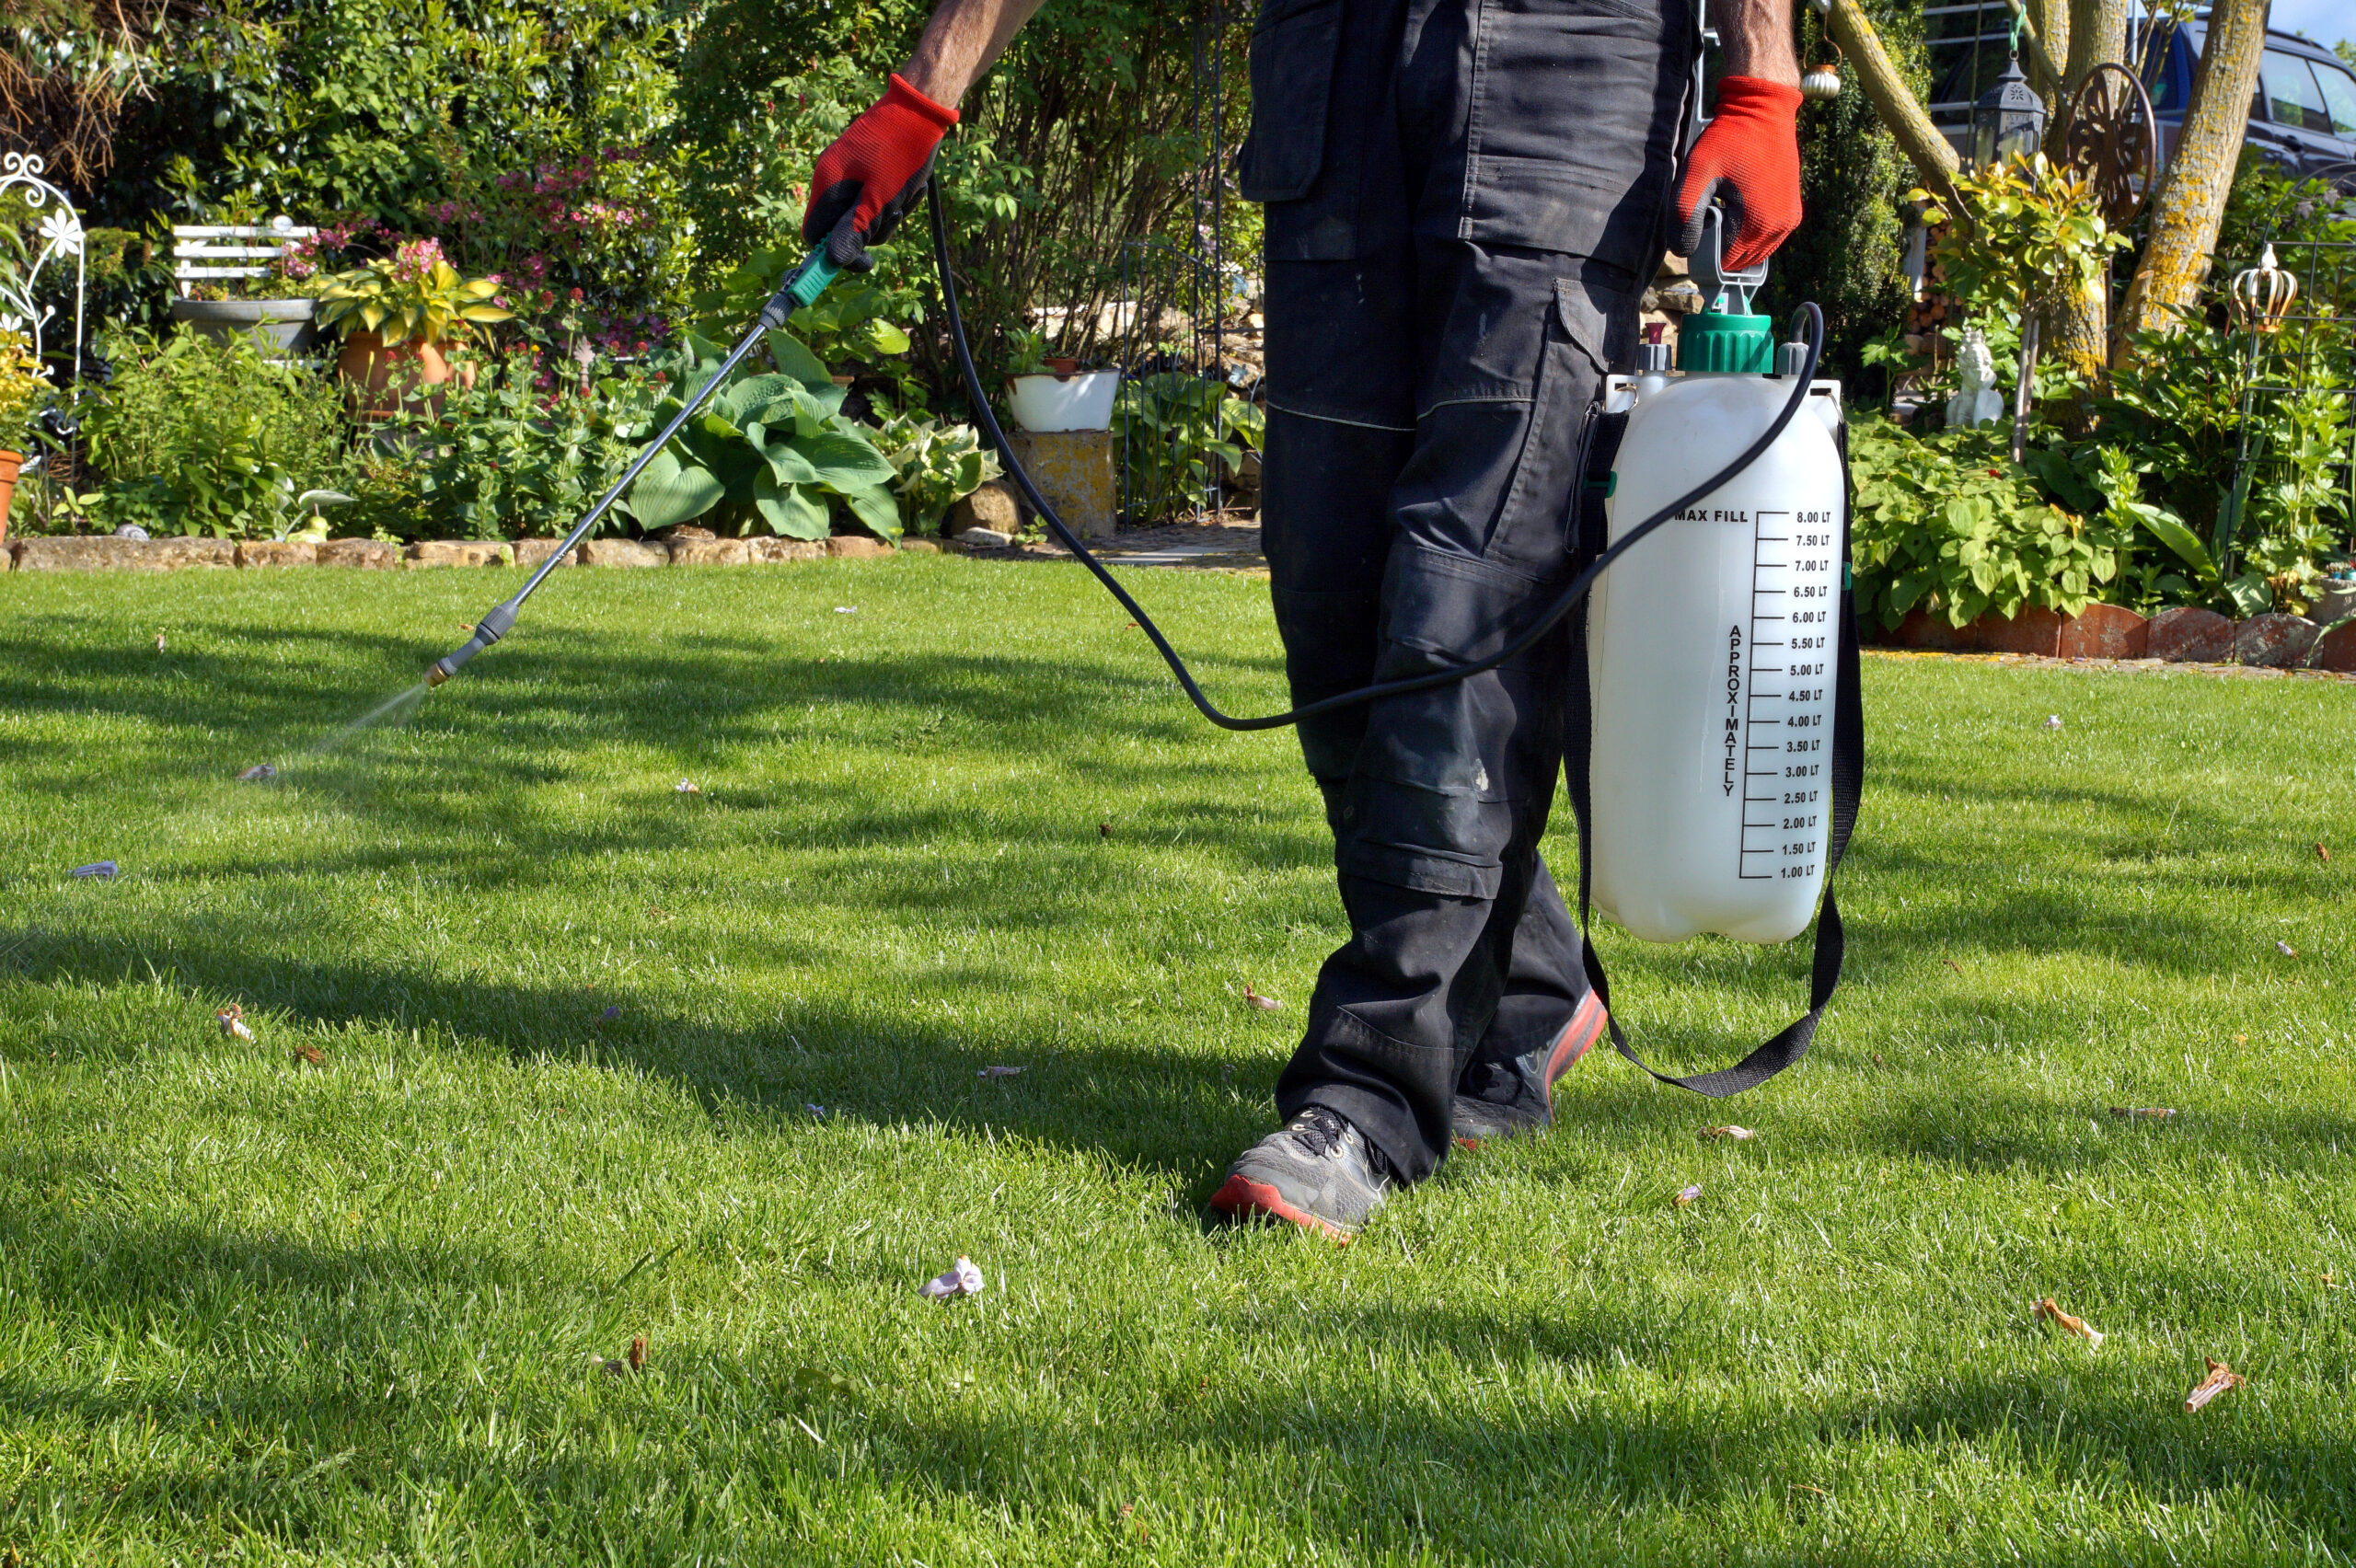 spraying pesticide with portable sprayer to eradicate garden weeds in the lawn. weedicide spray on the weeds in the garden. Pesticide use is hazardous to health. Weed control concept. weed killer